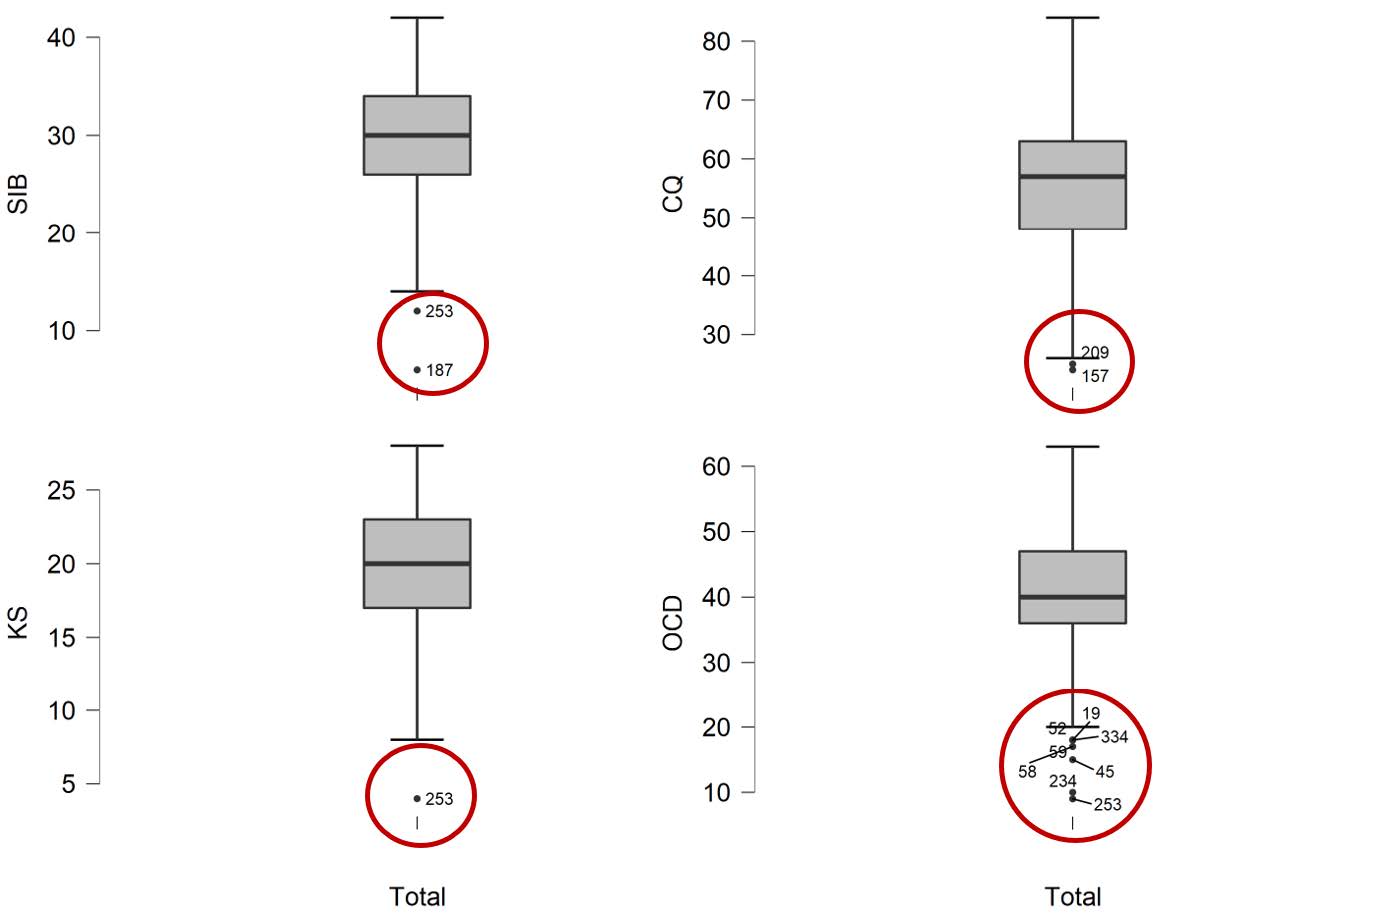 Screenshot of boxplot output for key study variables in JASP. Outliers in the bottom quartiles of each variable distribution are highlighted using red circles.